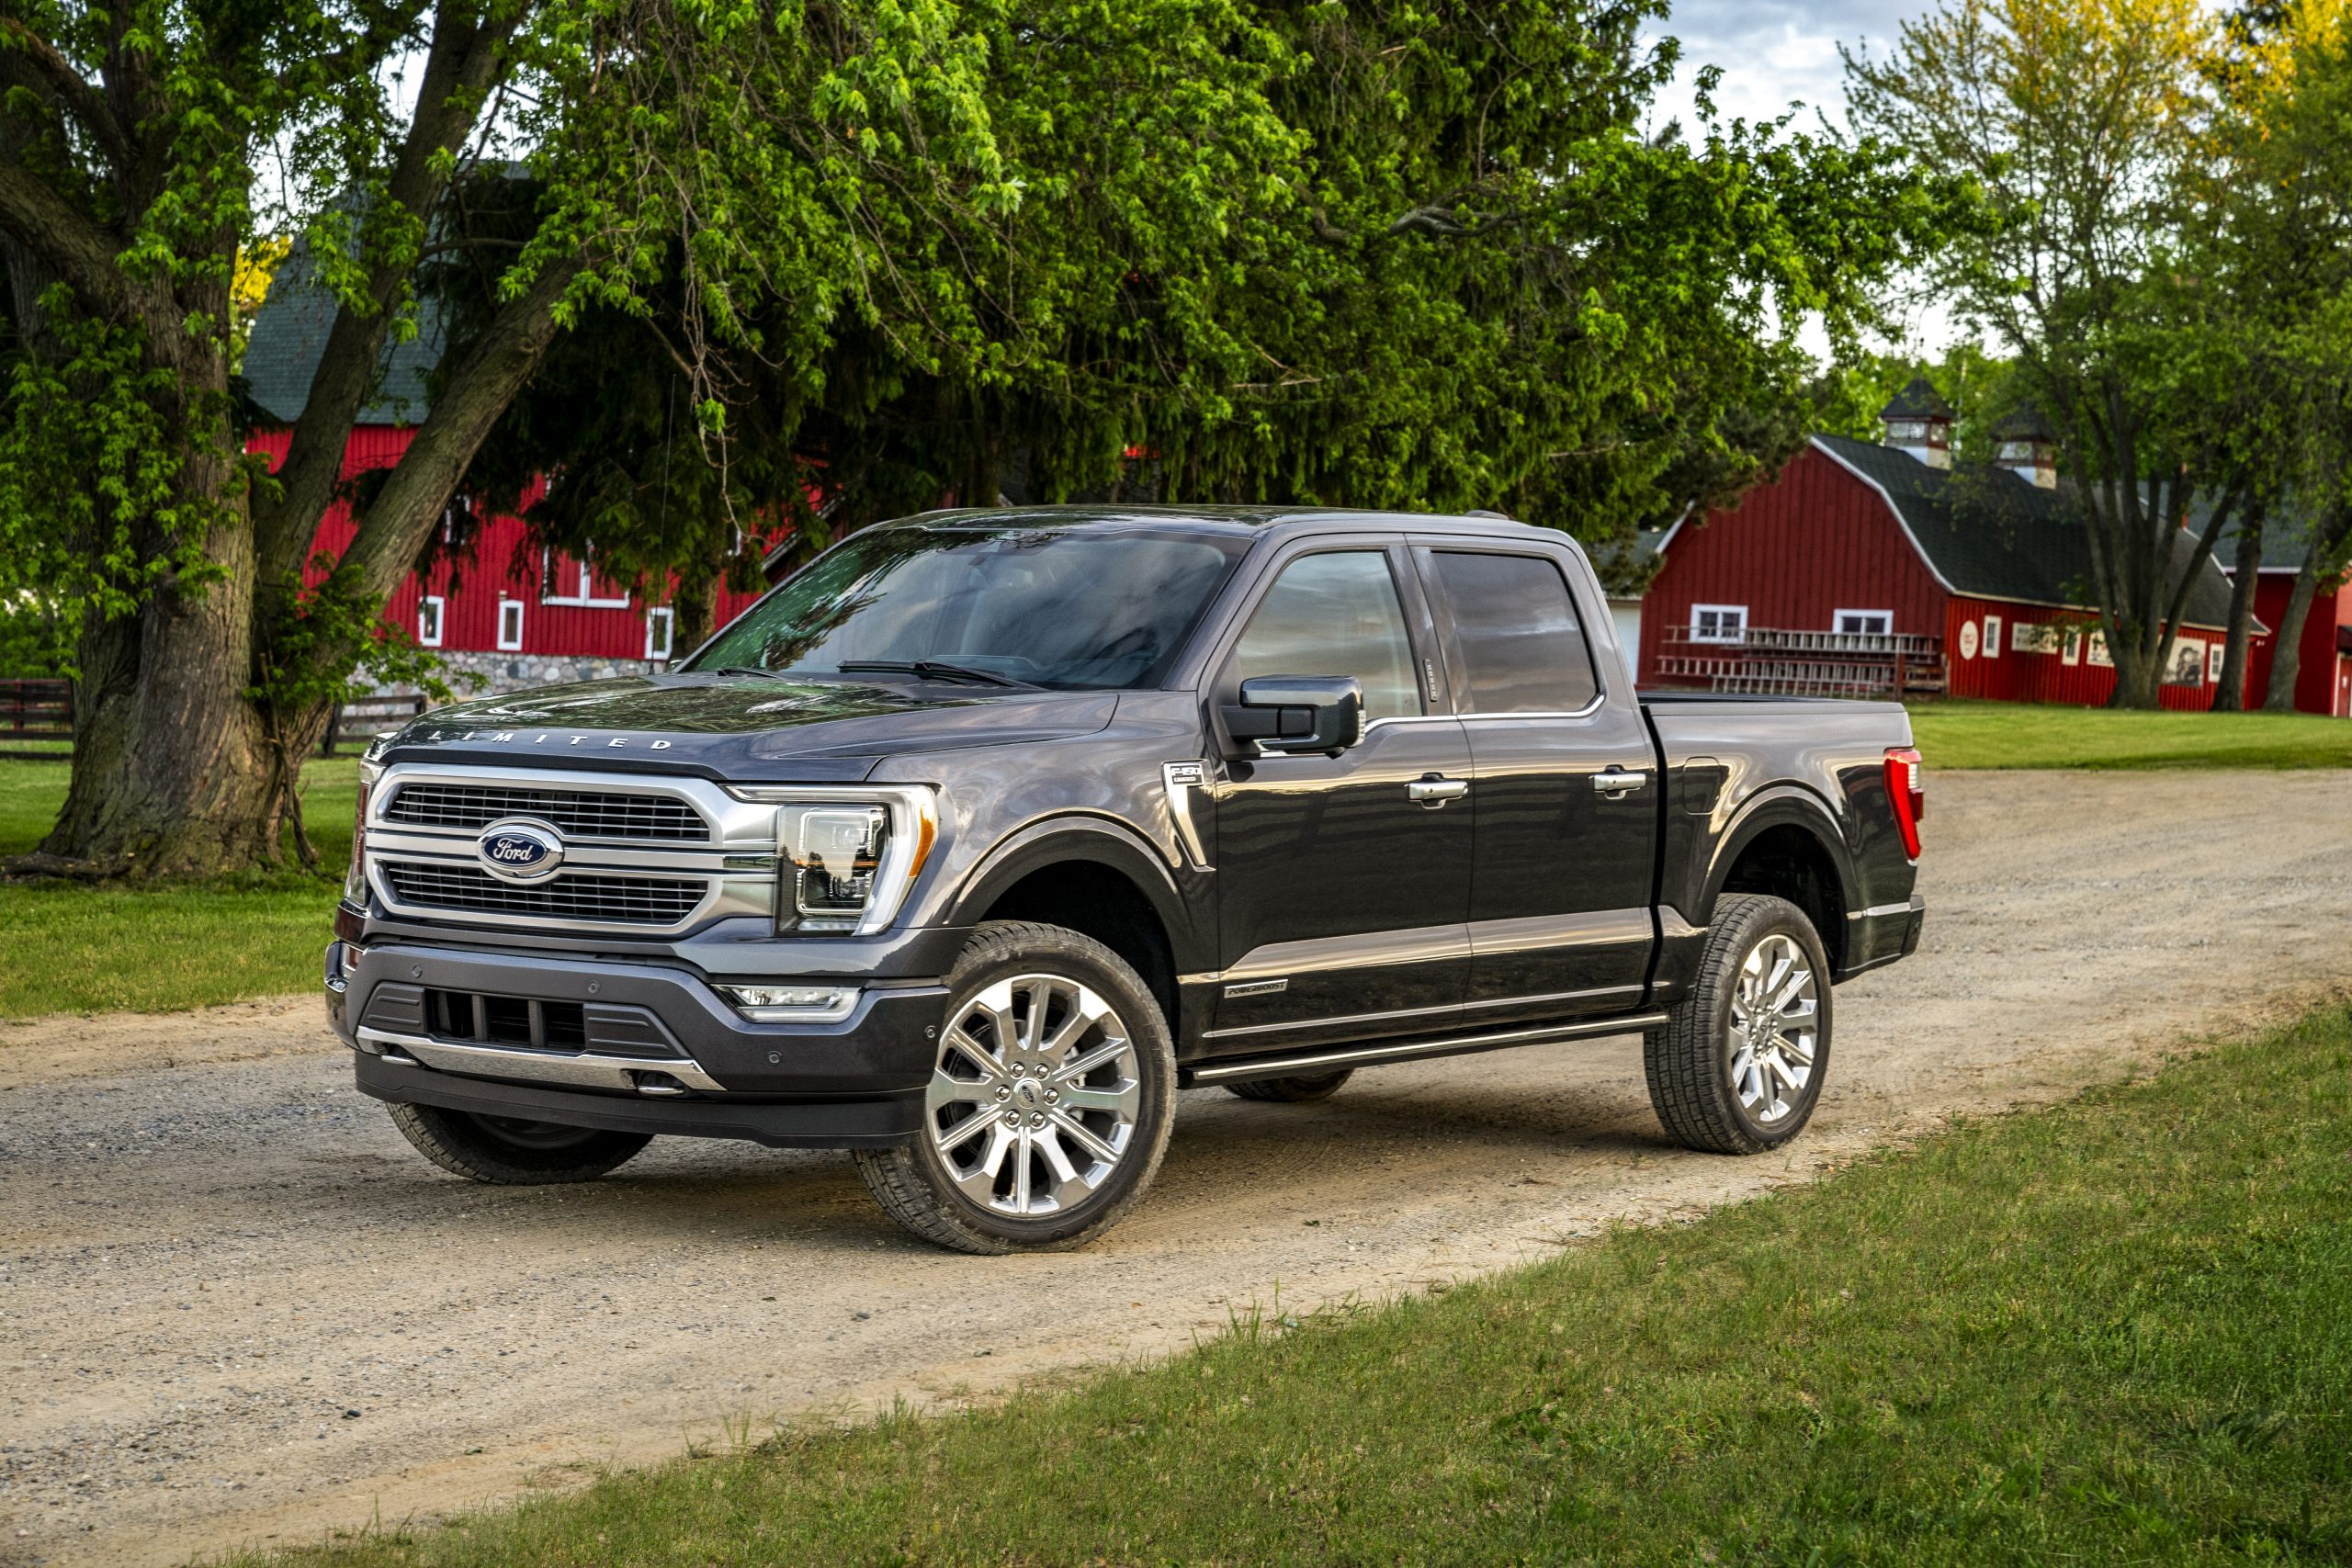 Ford reveals 2021 F-150 and new PowerBoost drivetrain - Hagerty